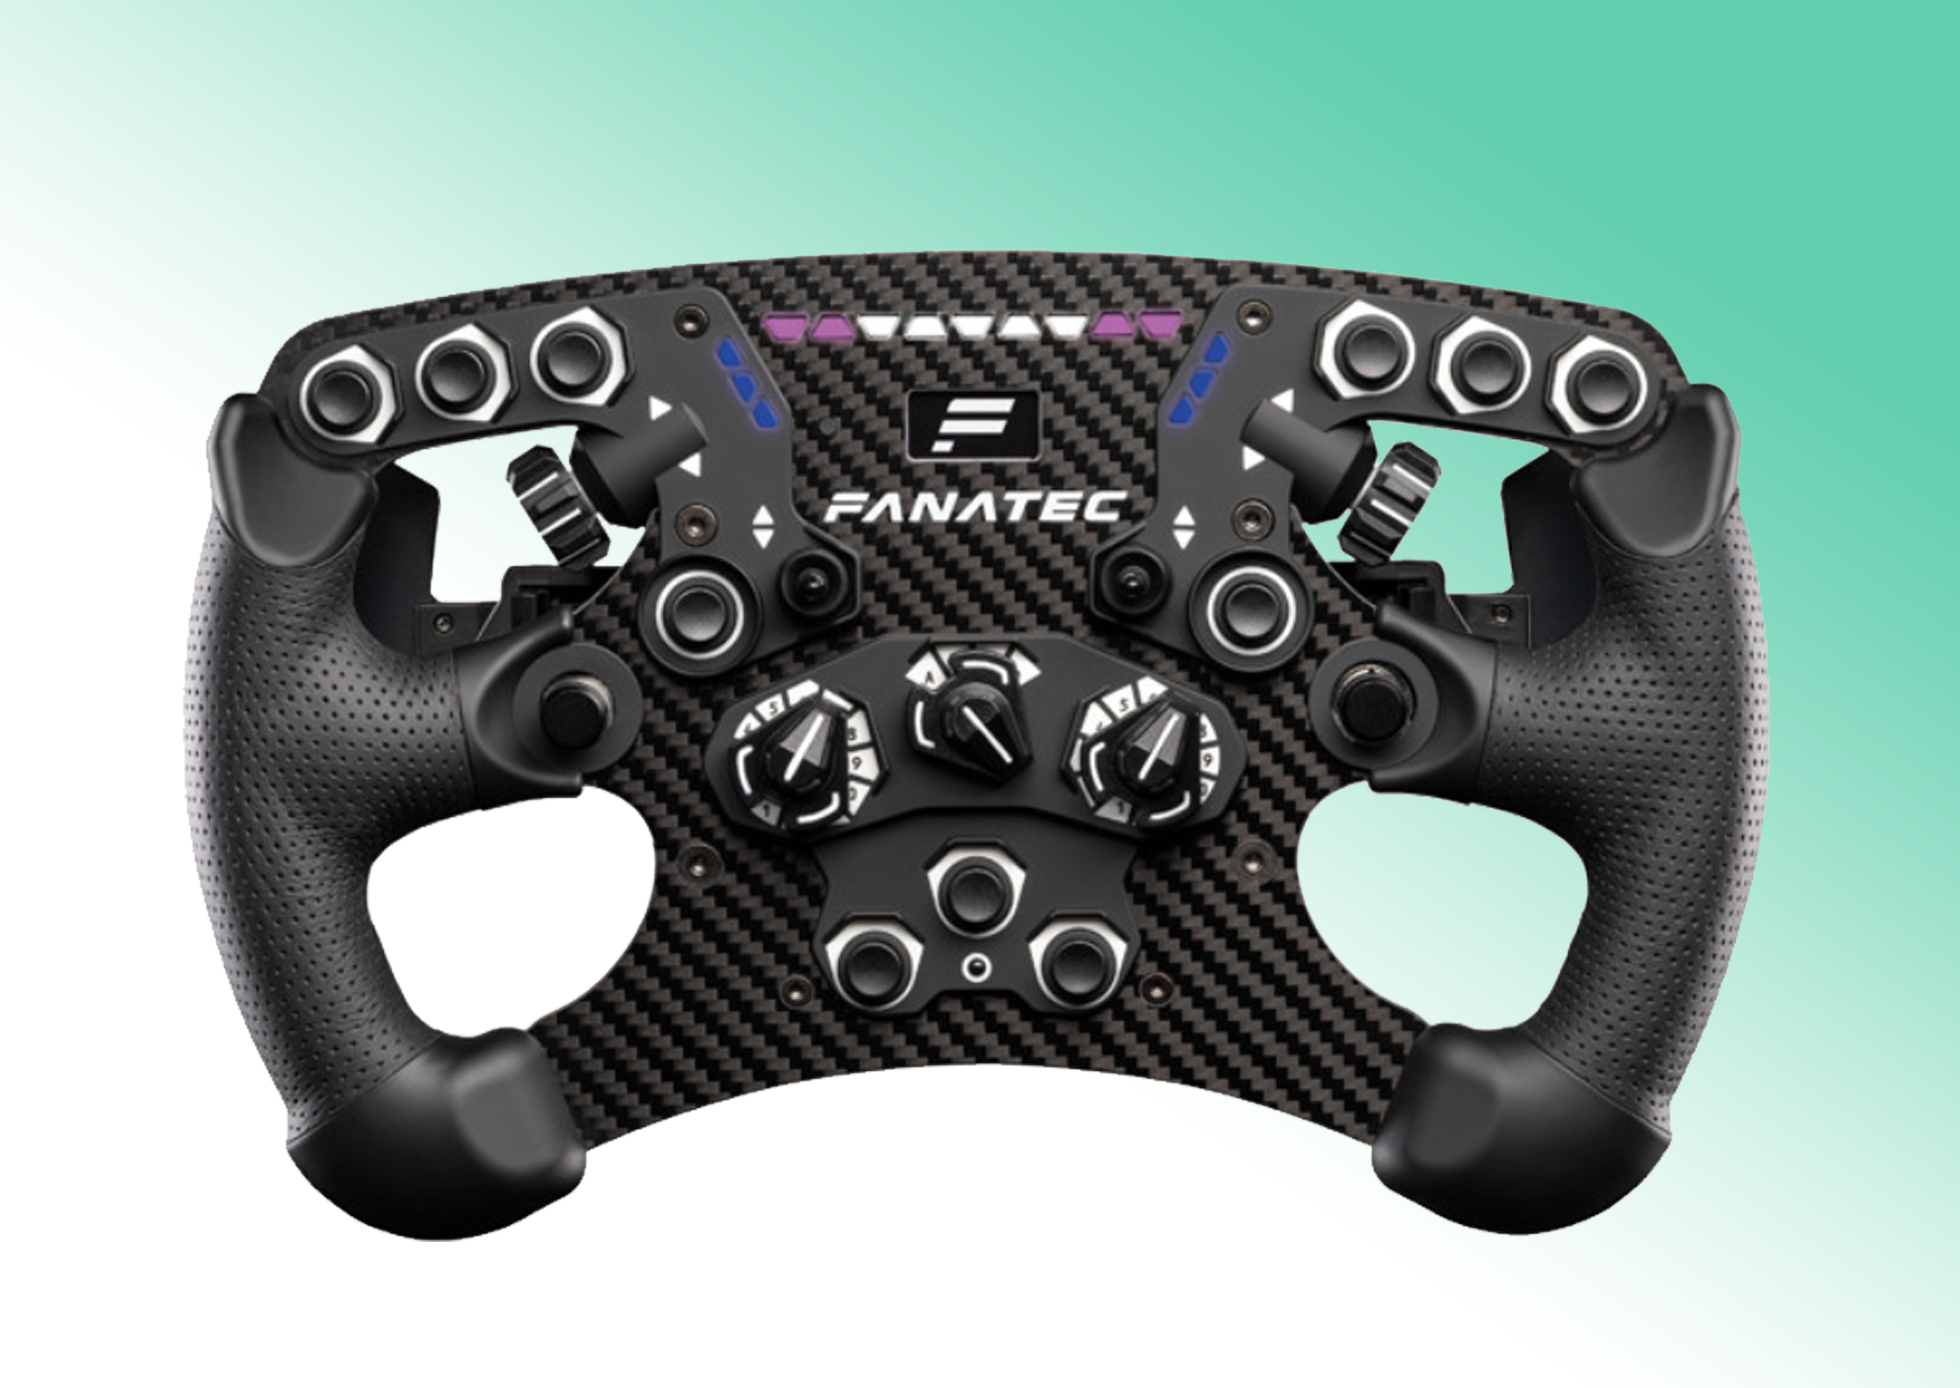 Fanatec clubsport formula V2.5 steering wheel test and review